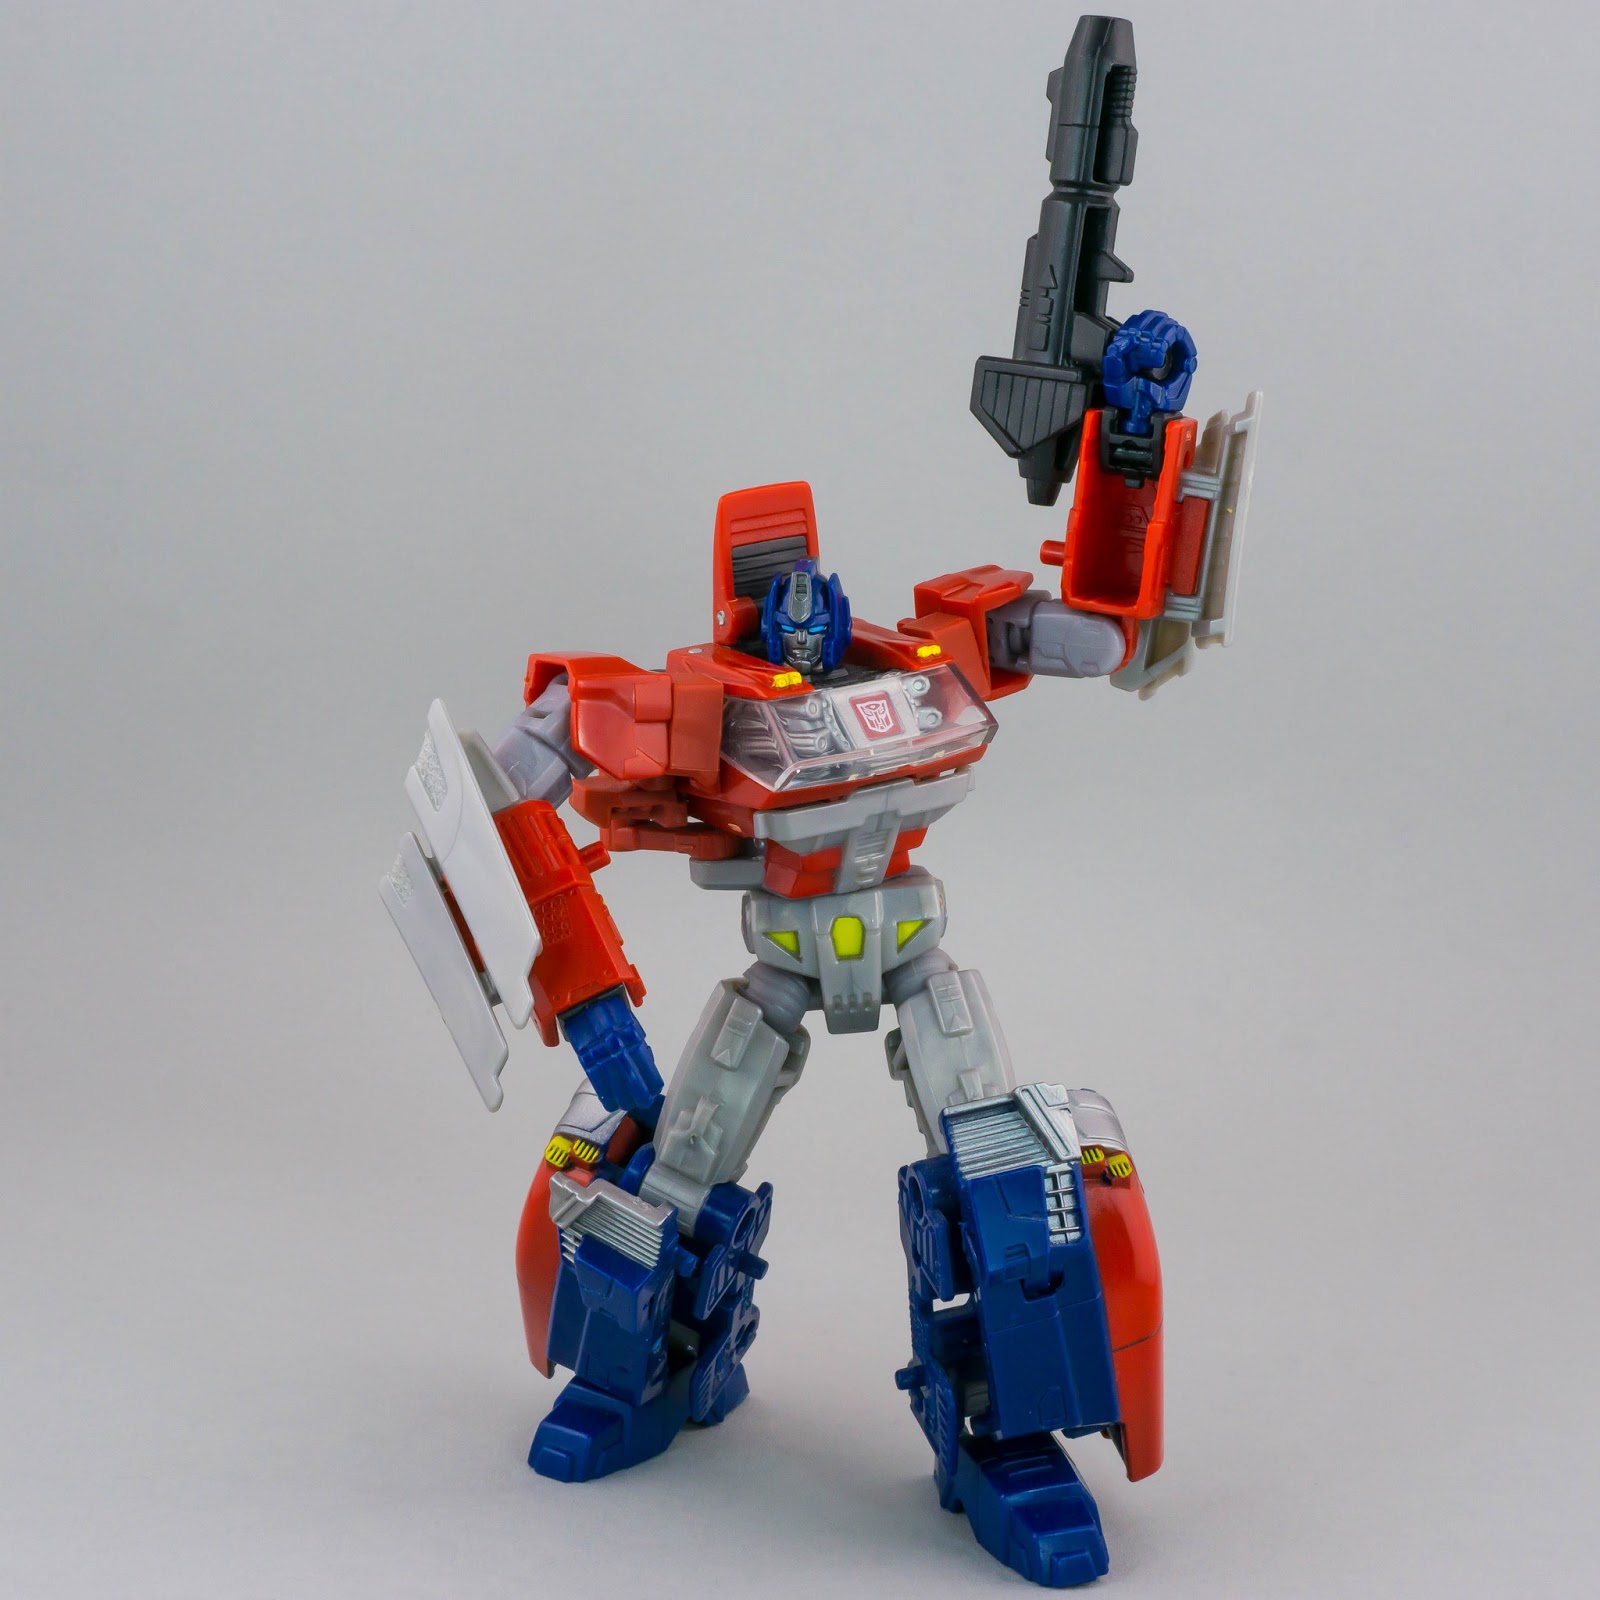 Transformers Generations Orion Pax in a heroic pose